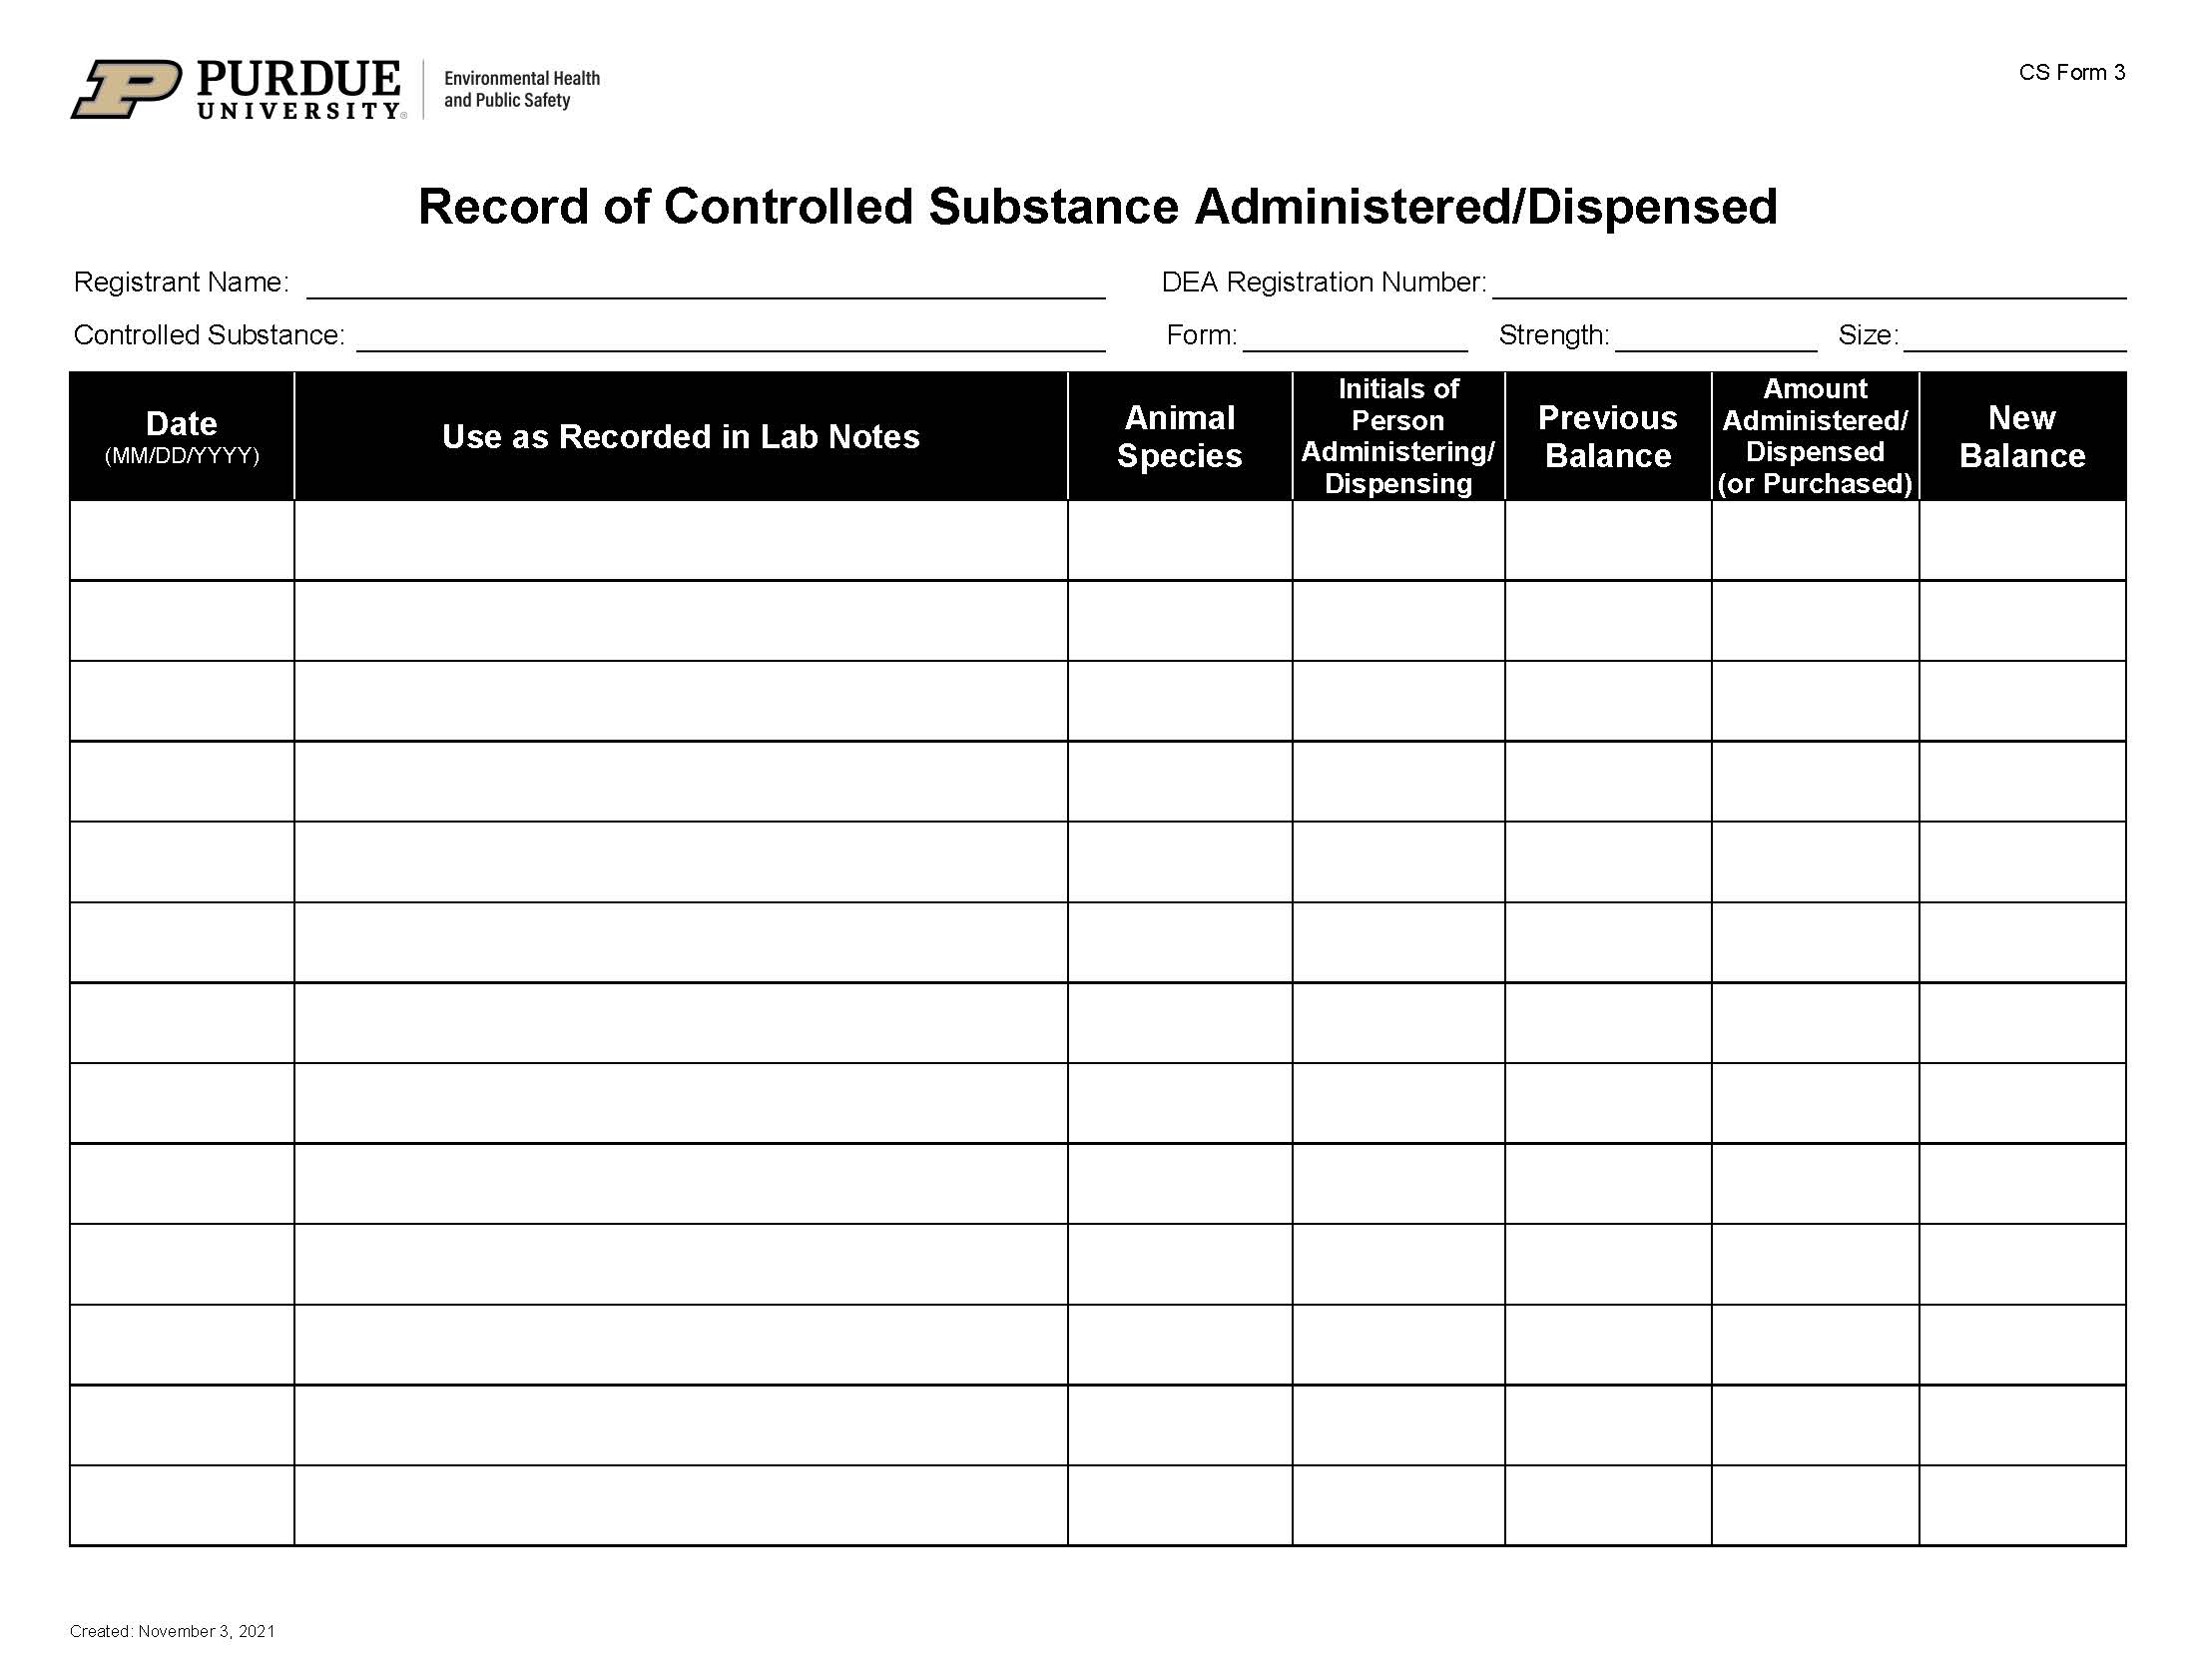 clickable link to the controlled substance administered/dispensed